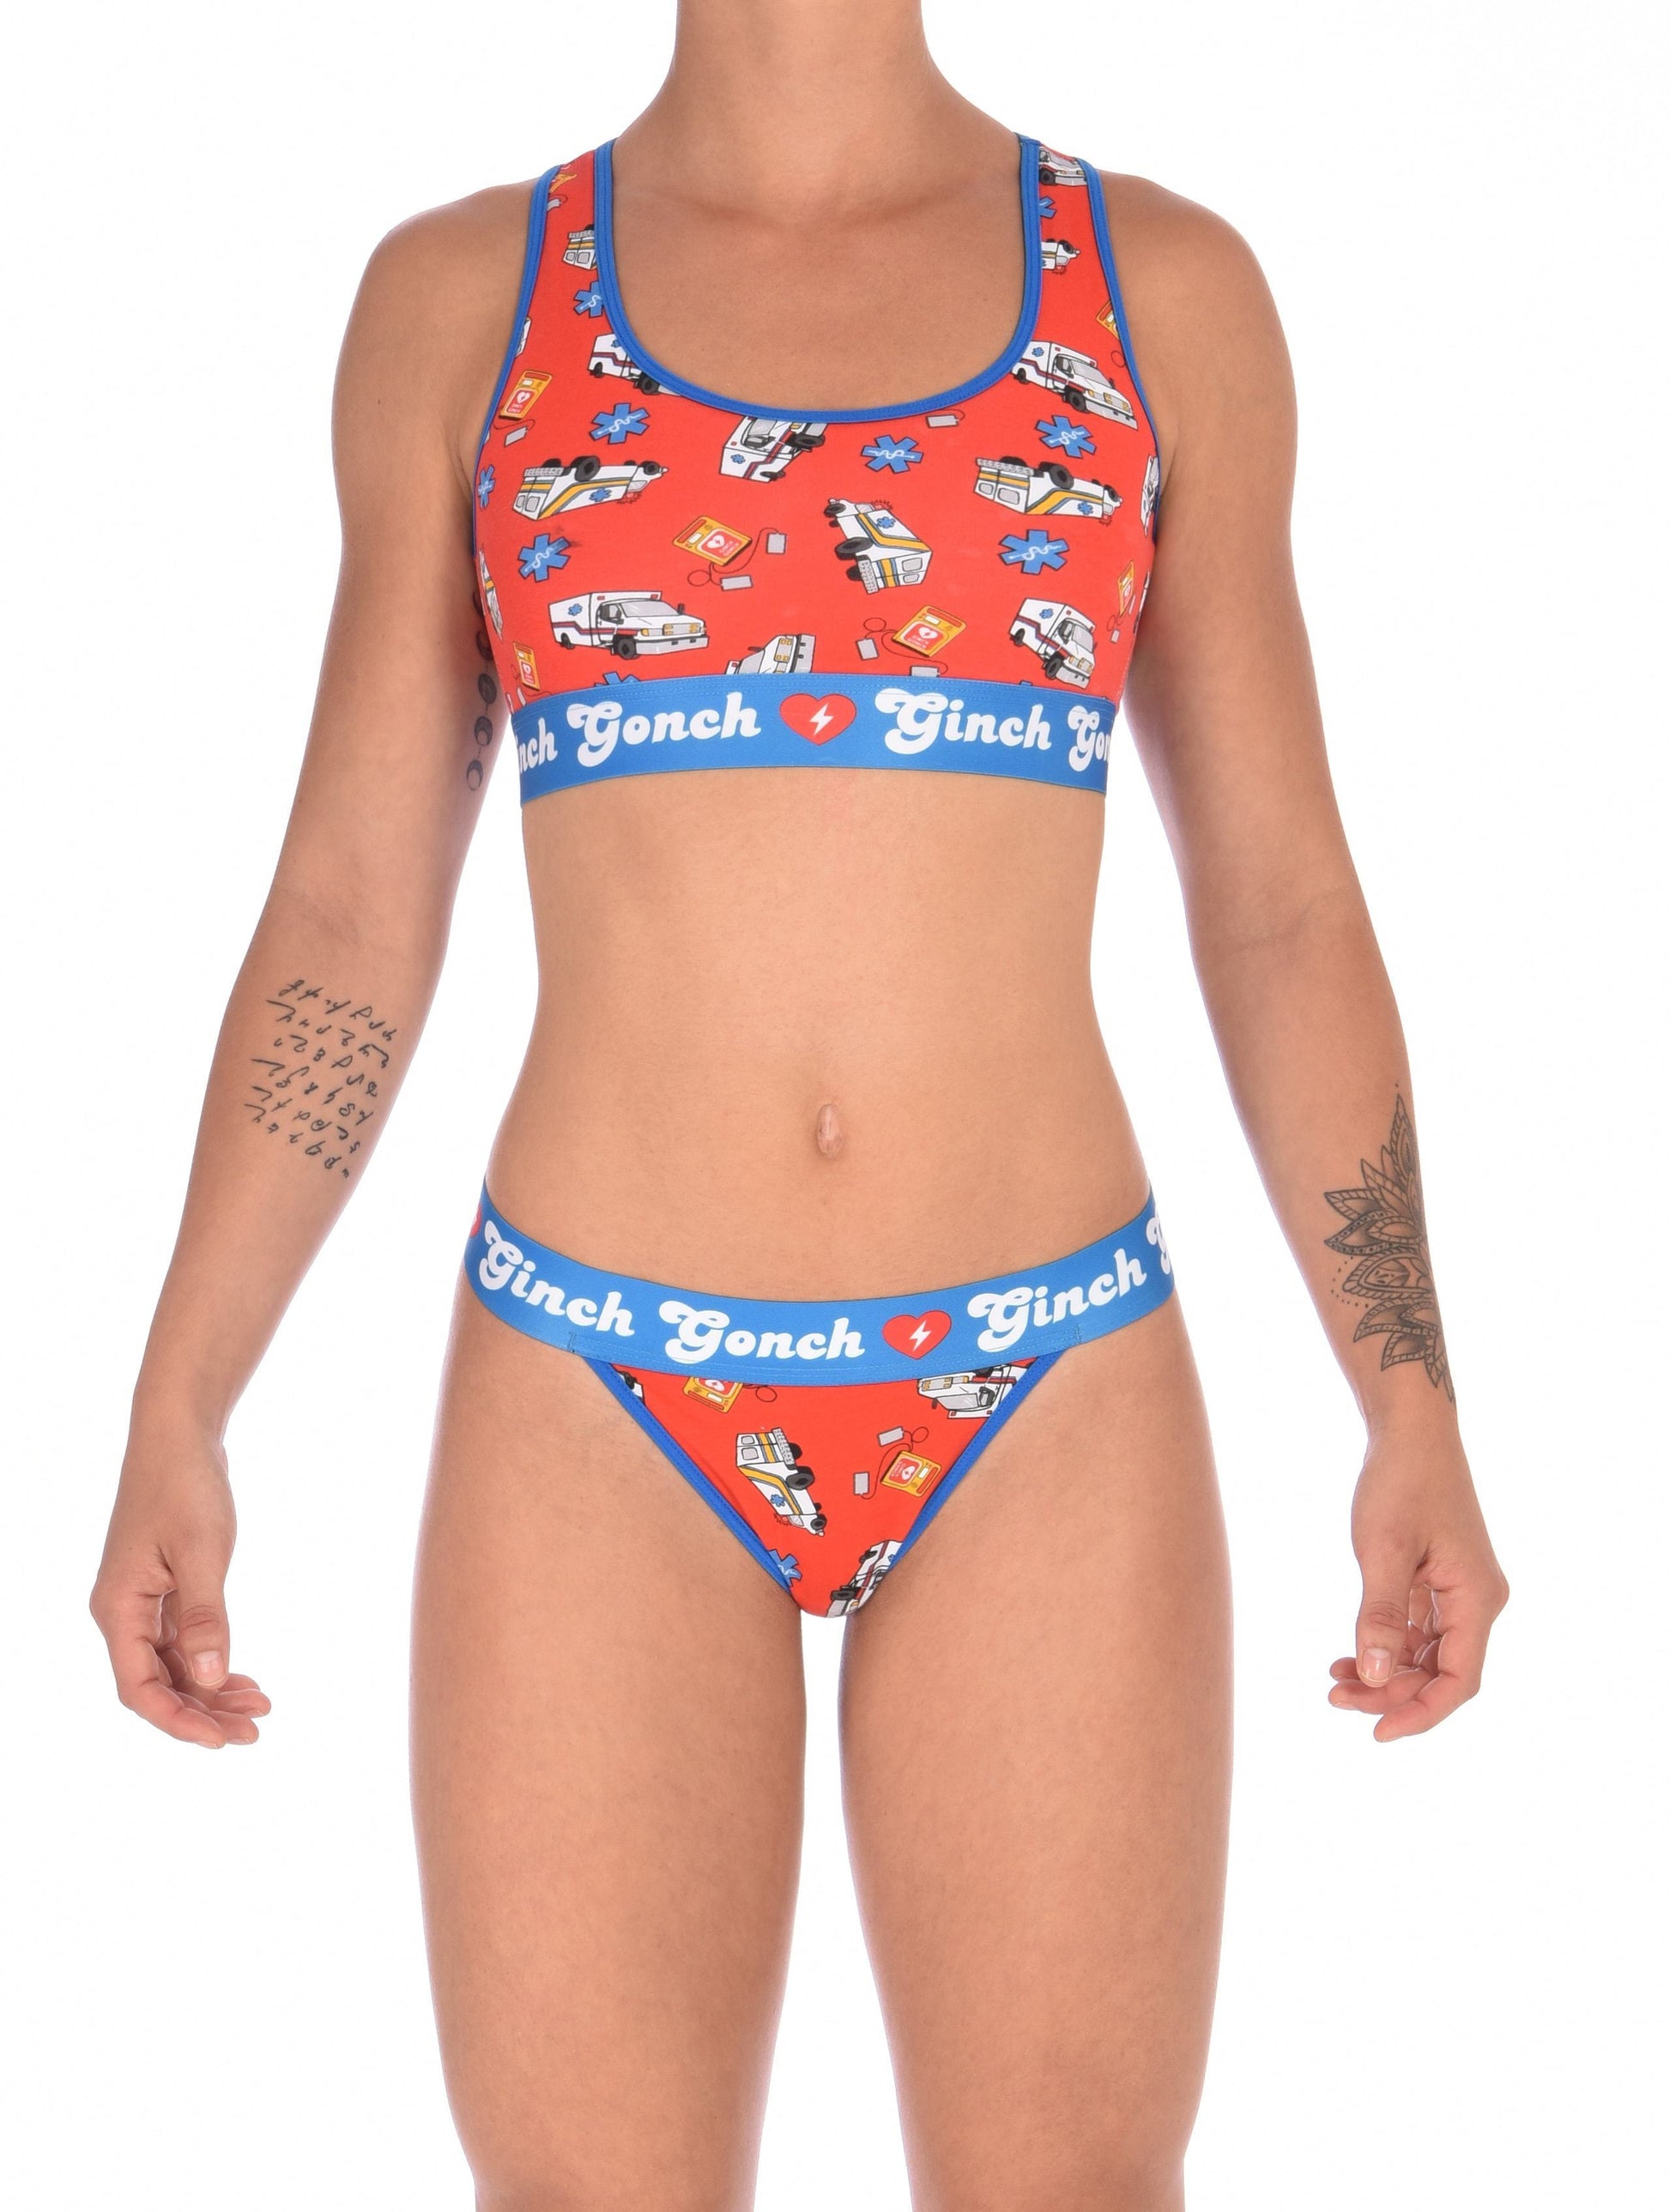 Ginch Gonch GG EMT thong women's ambulance print with medical symbol and equipment on red background with blue trim and printed waistband front shown with matching sports bra